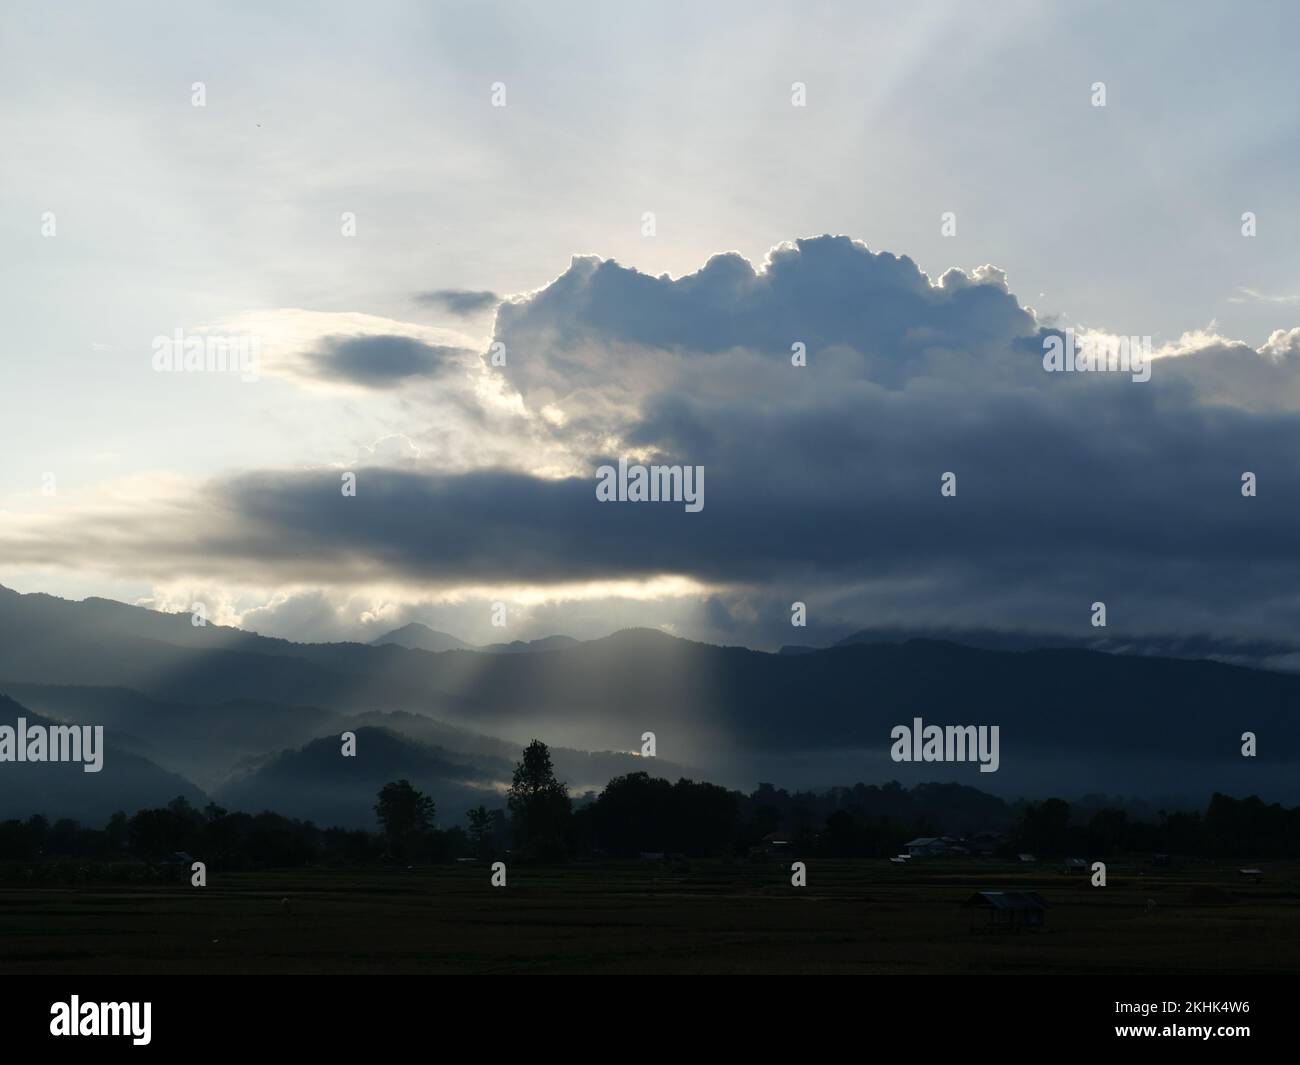 Silhouette of tree and mountain with sunbeam light shoot through the dark cloud to the land at sunrise, Mist covers the forest and mountains at dawn Stock Photo